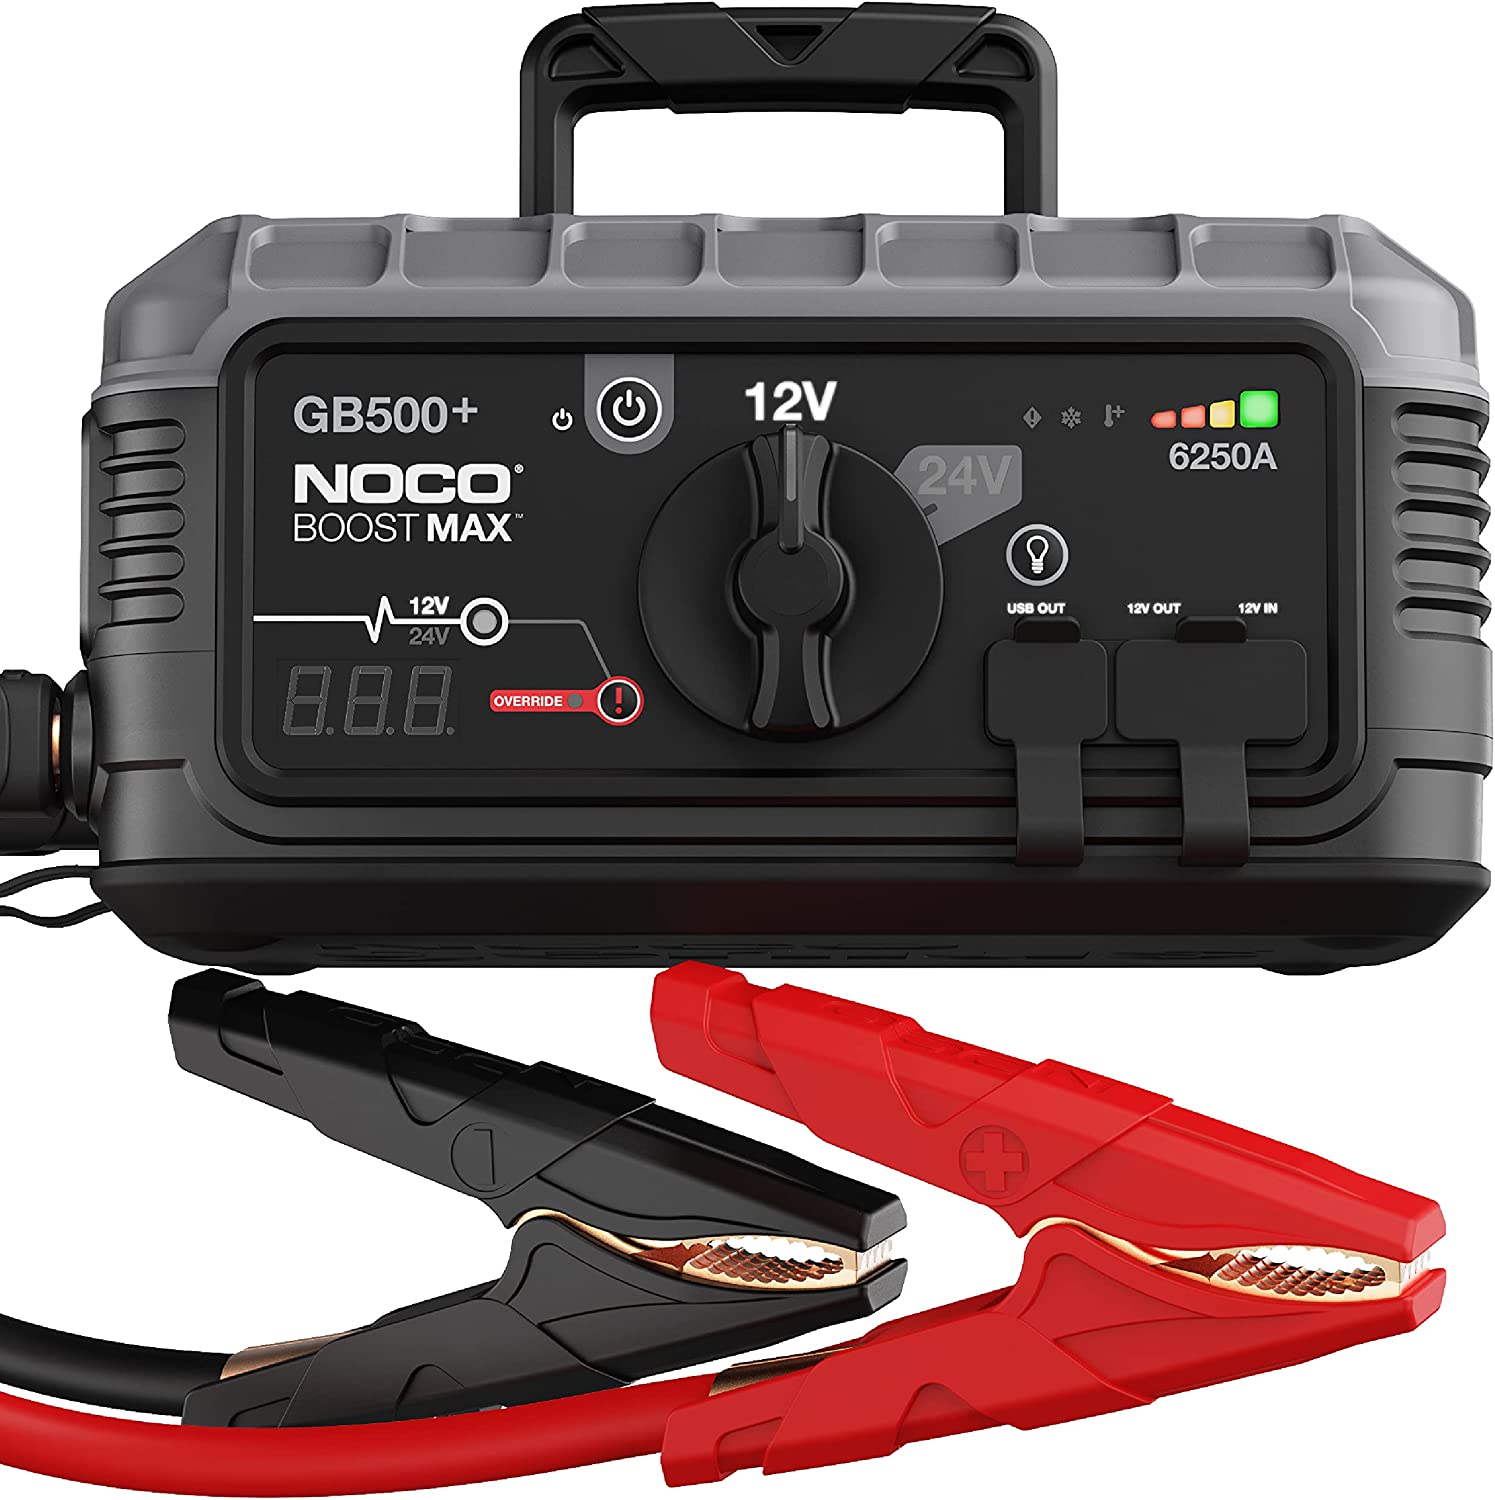 NOCO GB500 Boost Max Jump Starter - 6250A 12V AND 24V Ultra Lithium Jump Starter Questions & Answers